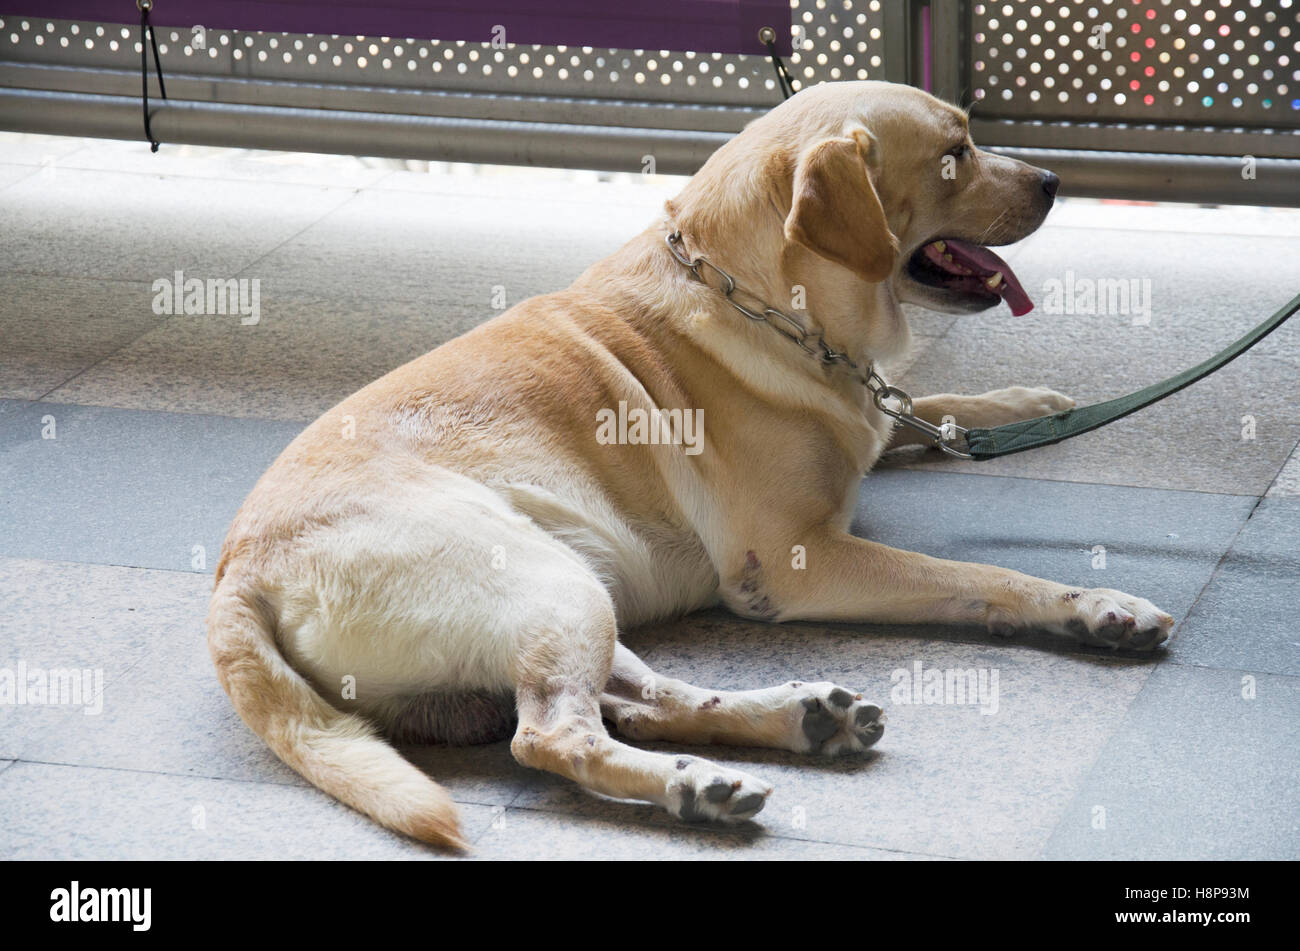 Police dogs known as K-9 dog or K9 dog sitting on floor of BTS in Bangkok, Thailand Stock Photo